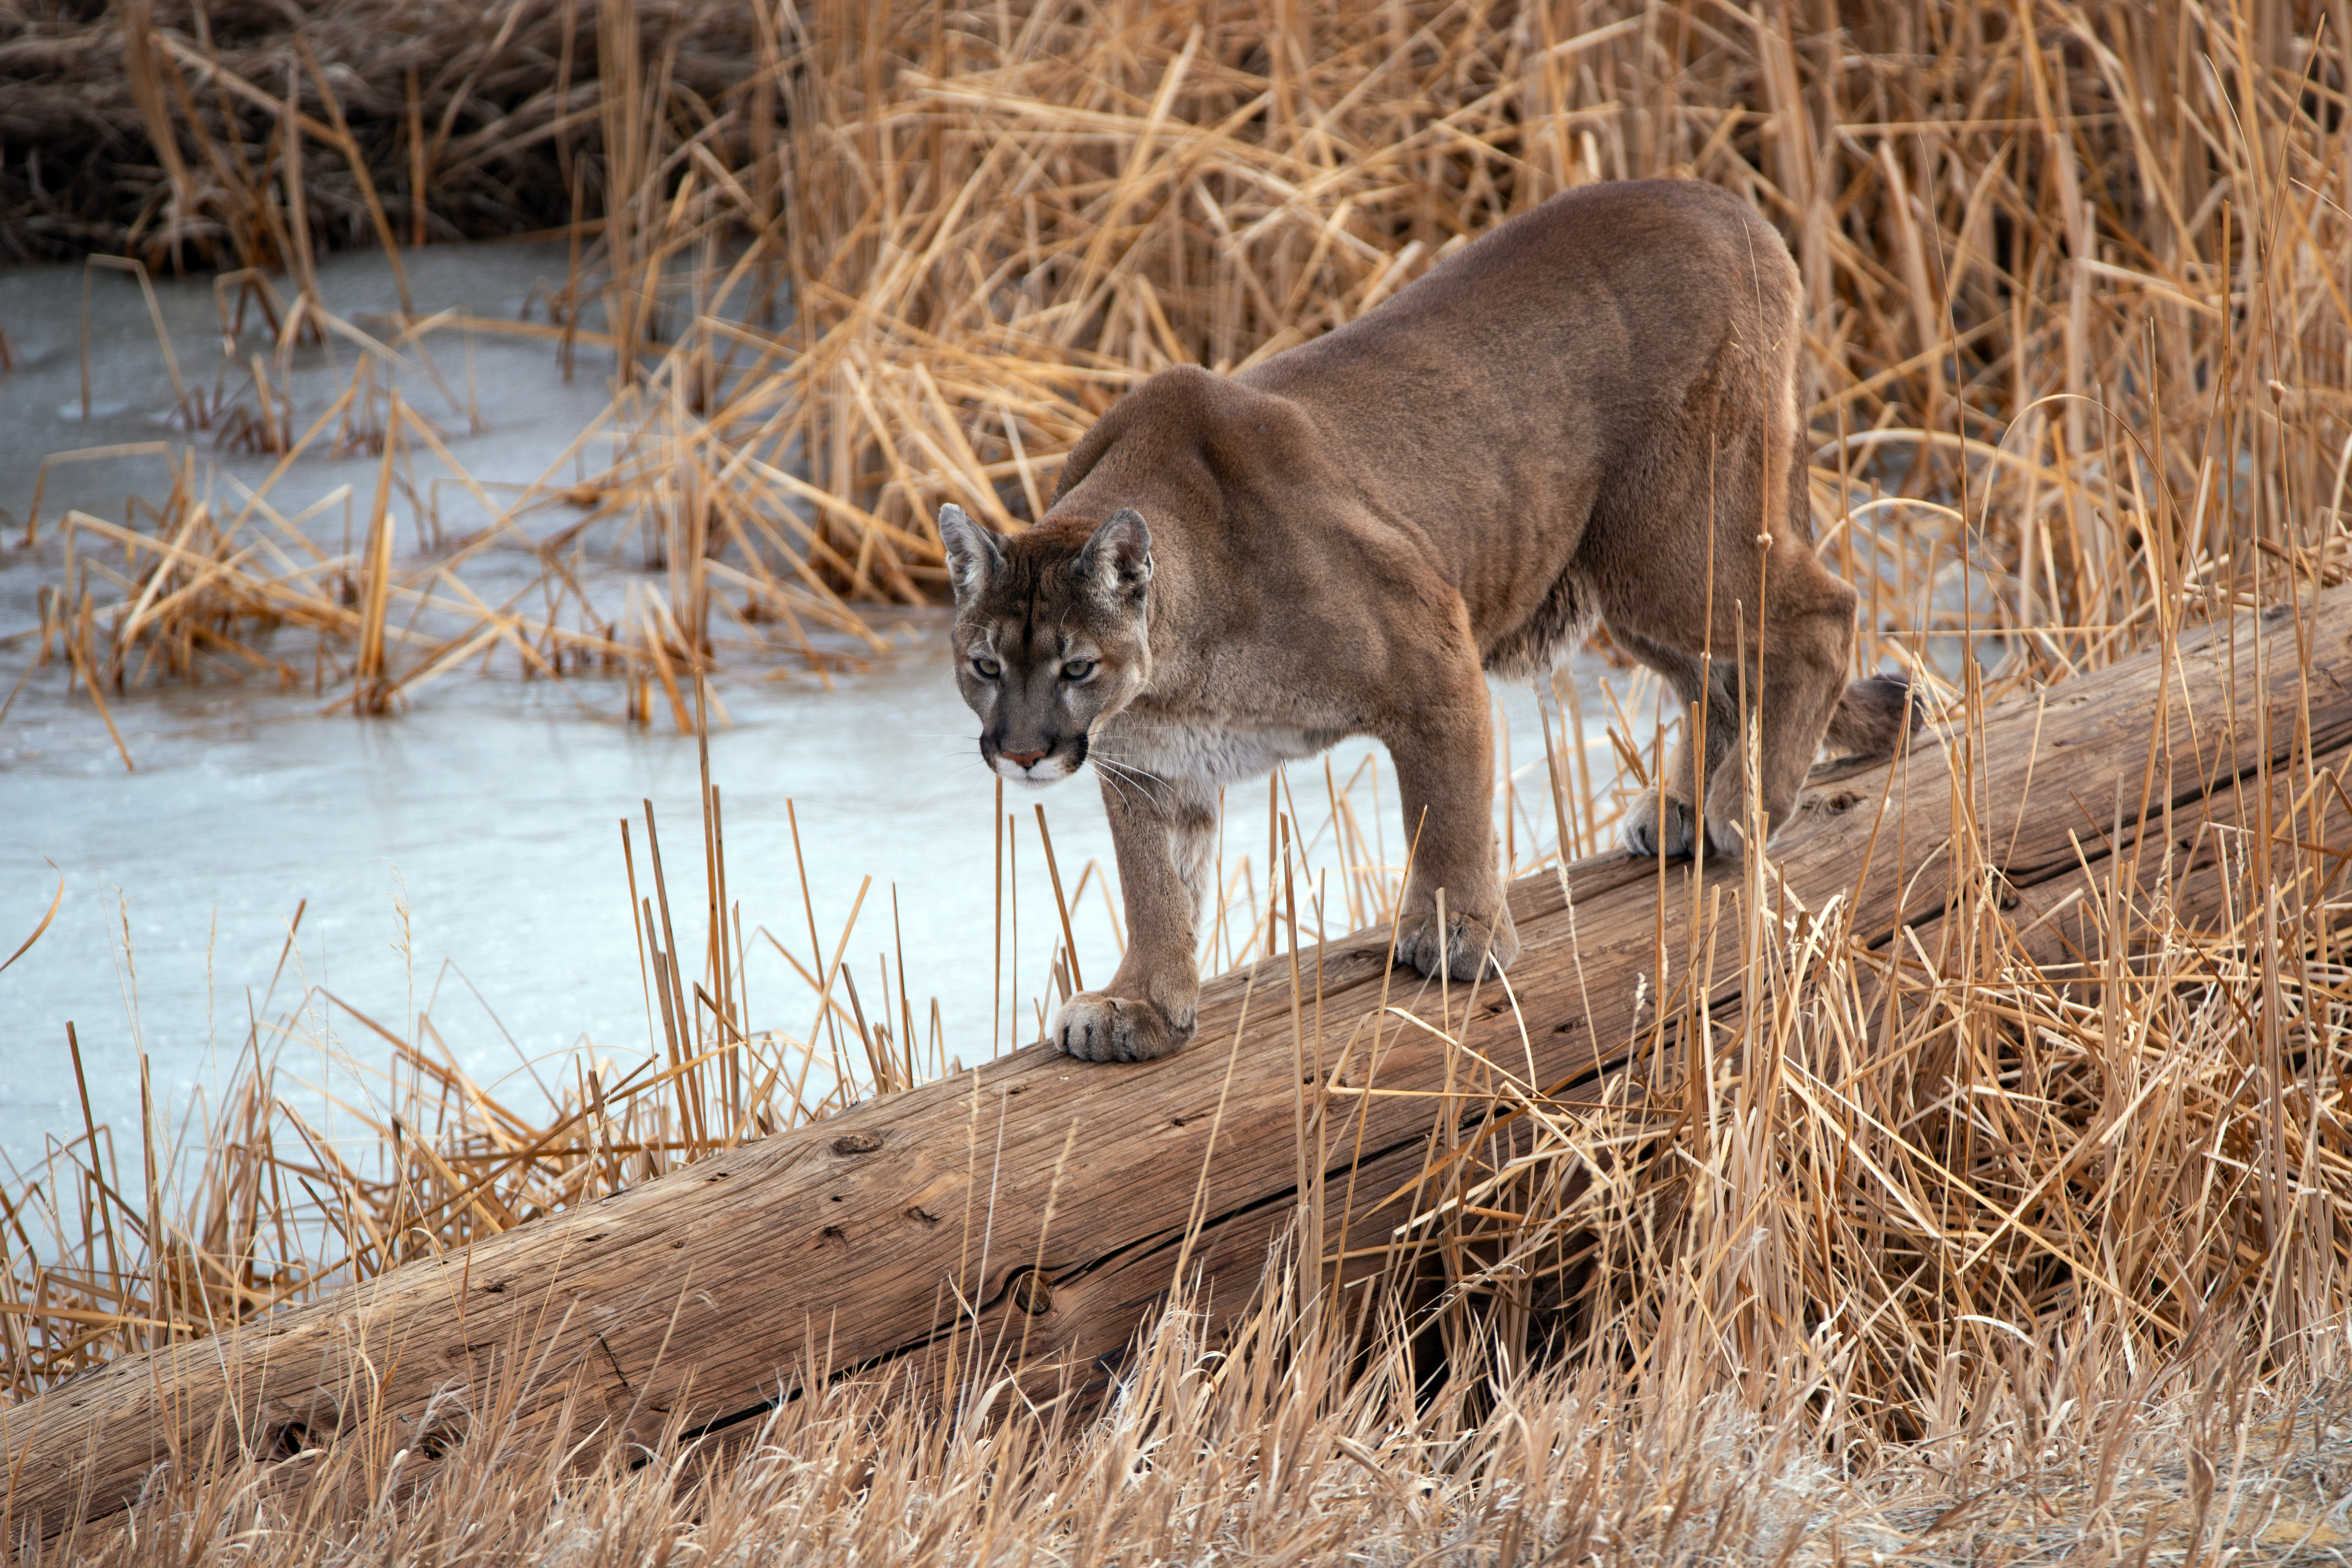 A cougar in winter.